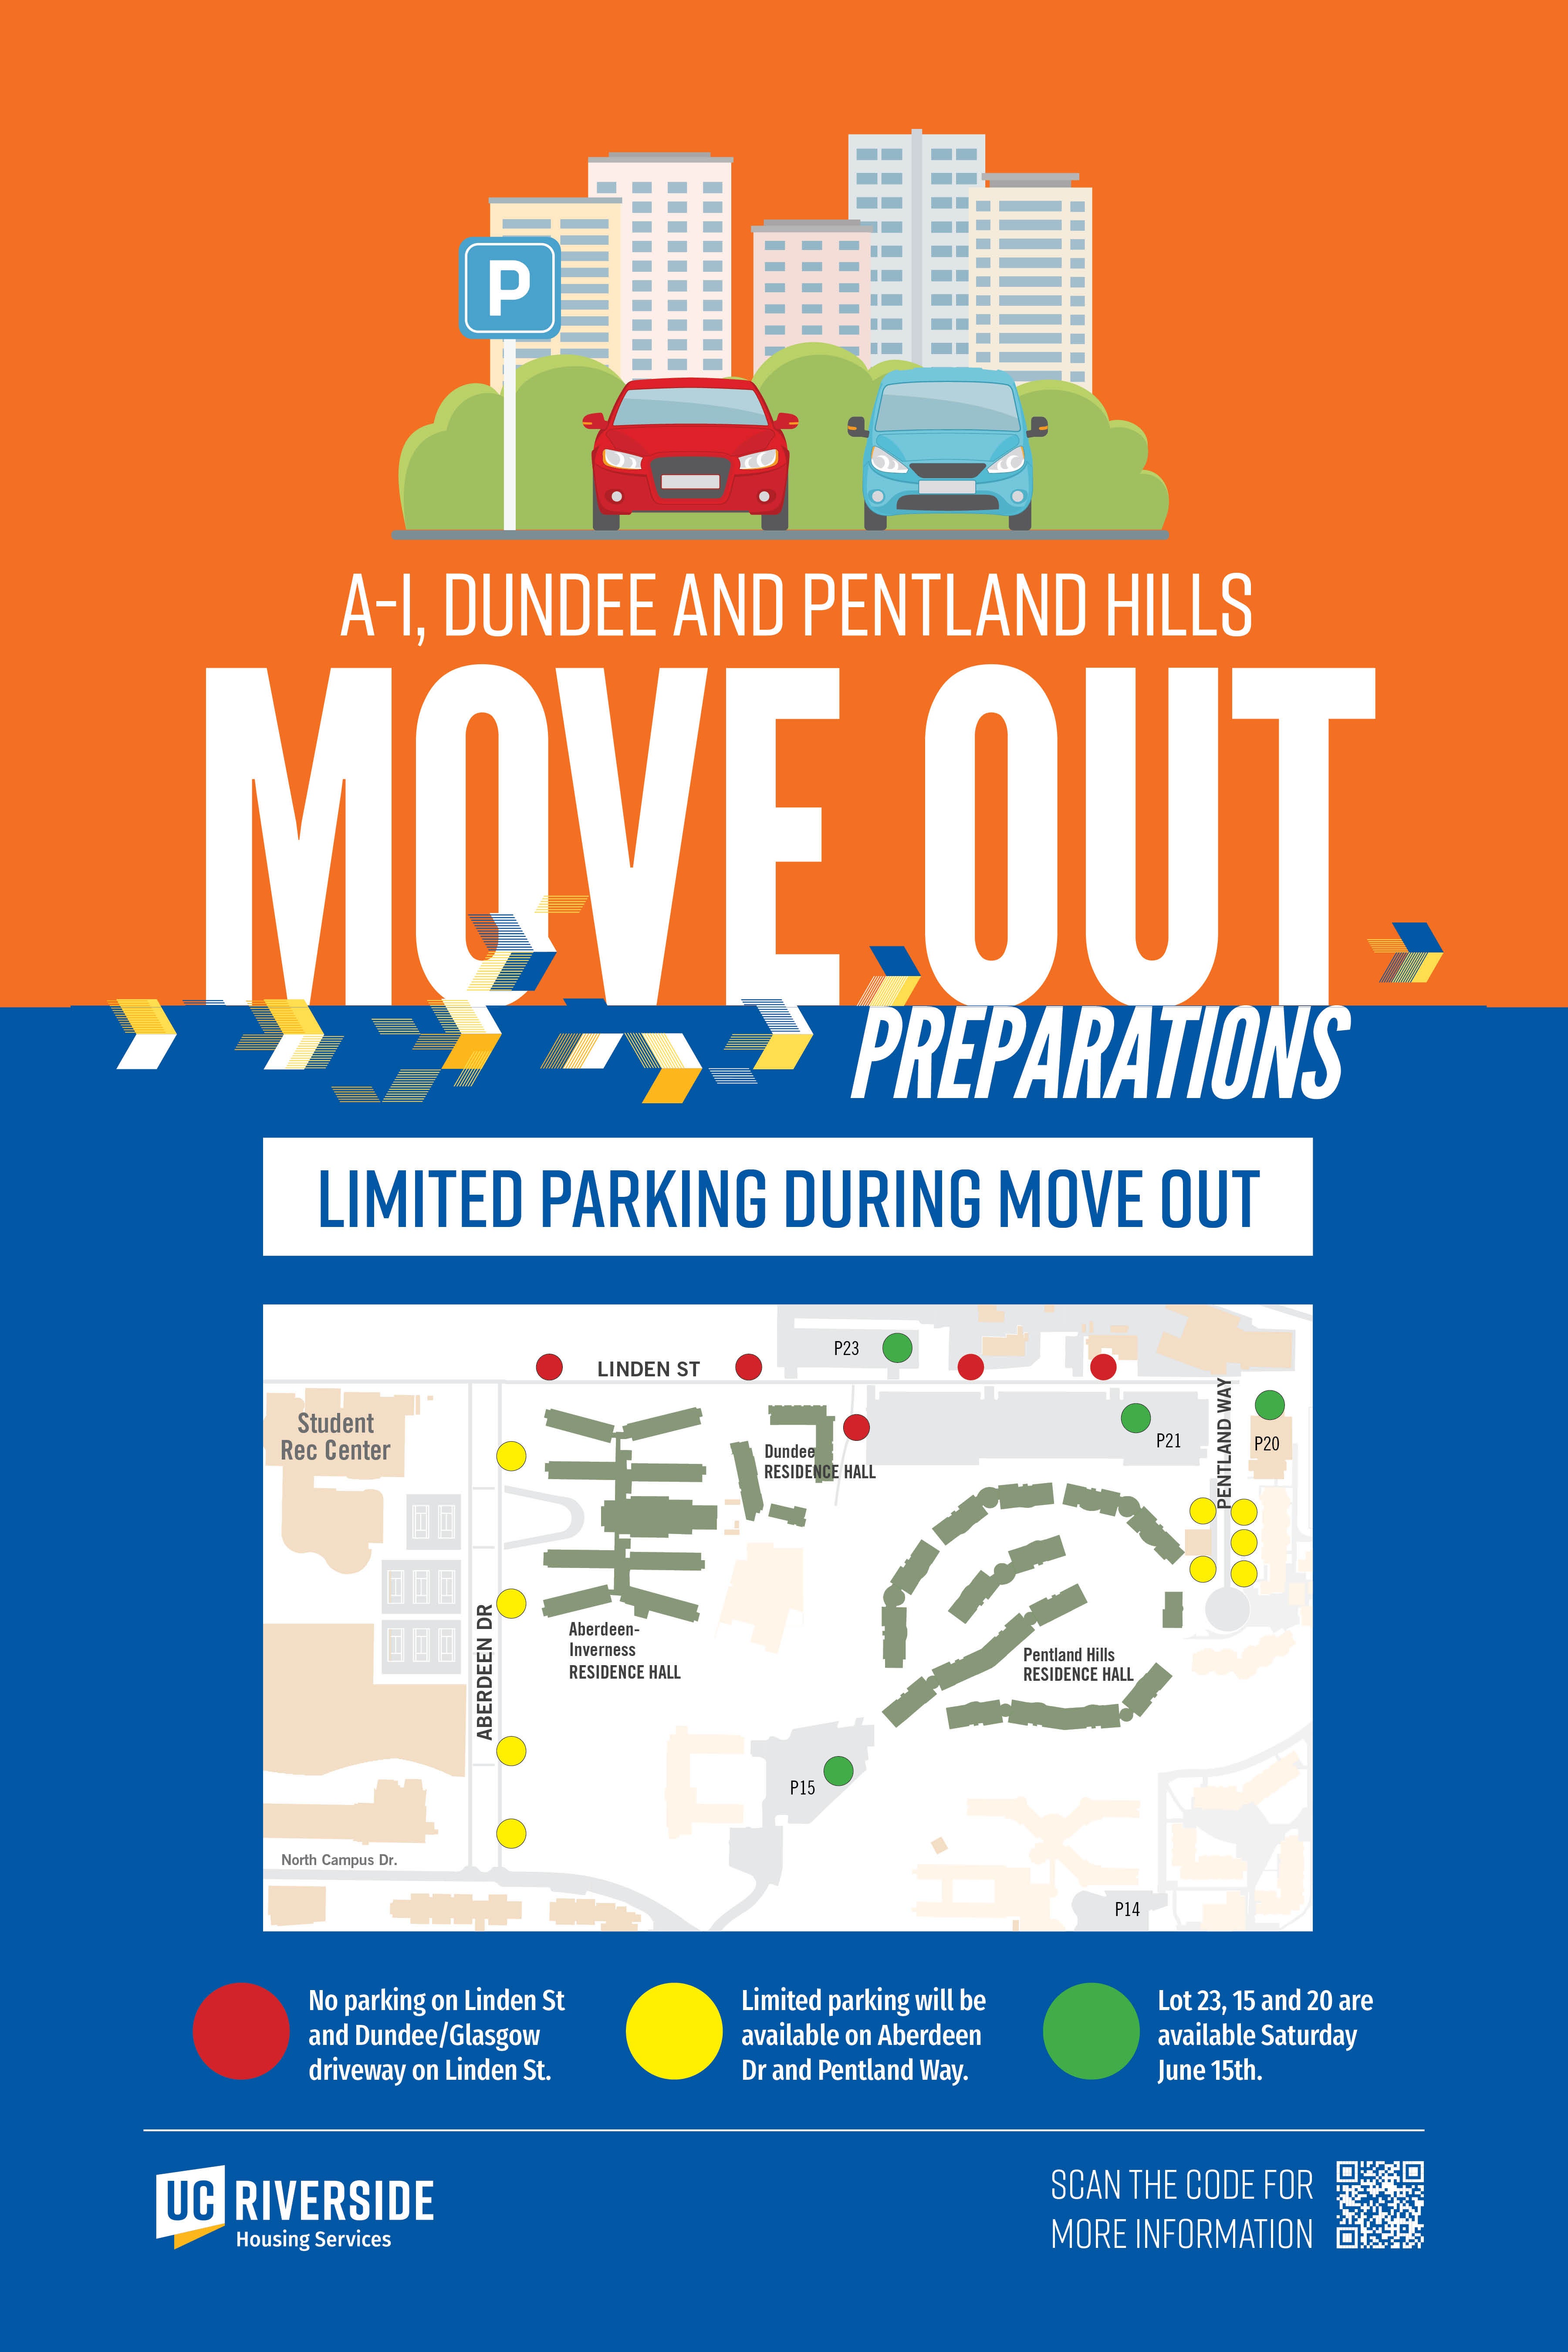 Move-Out Parking Preparations